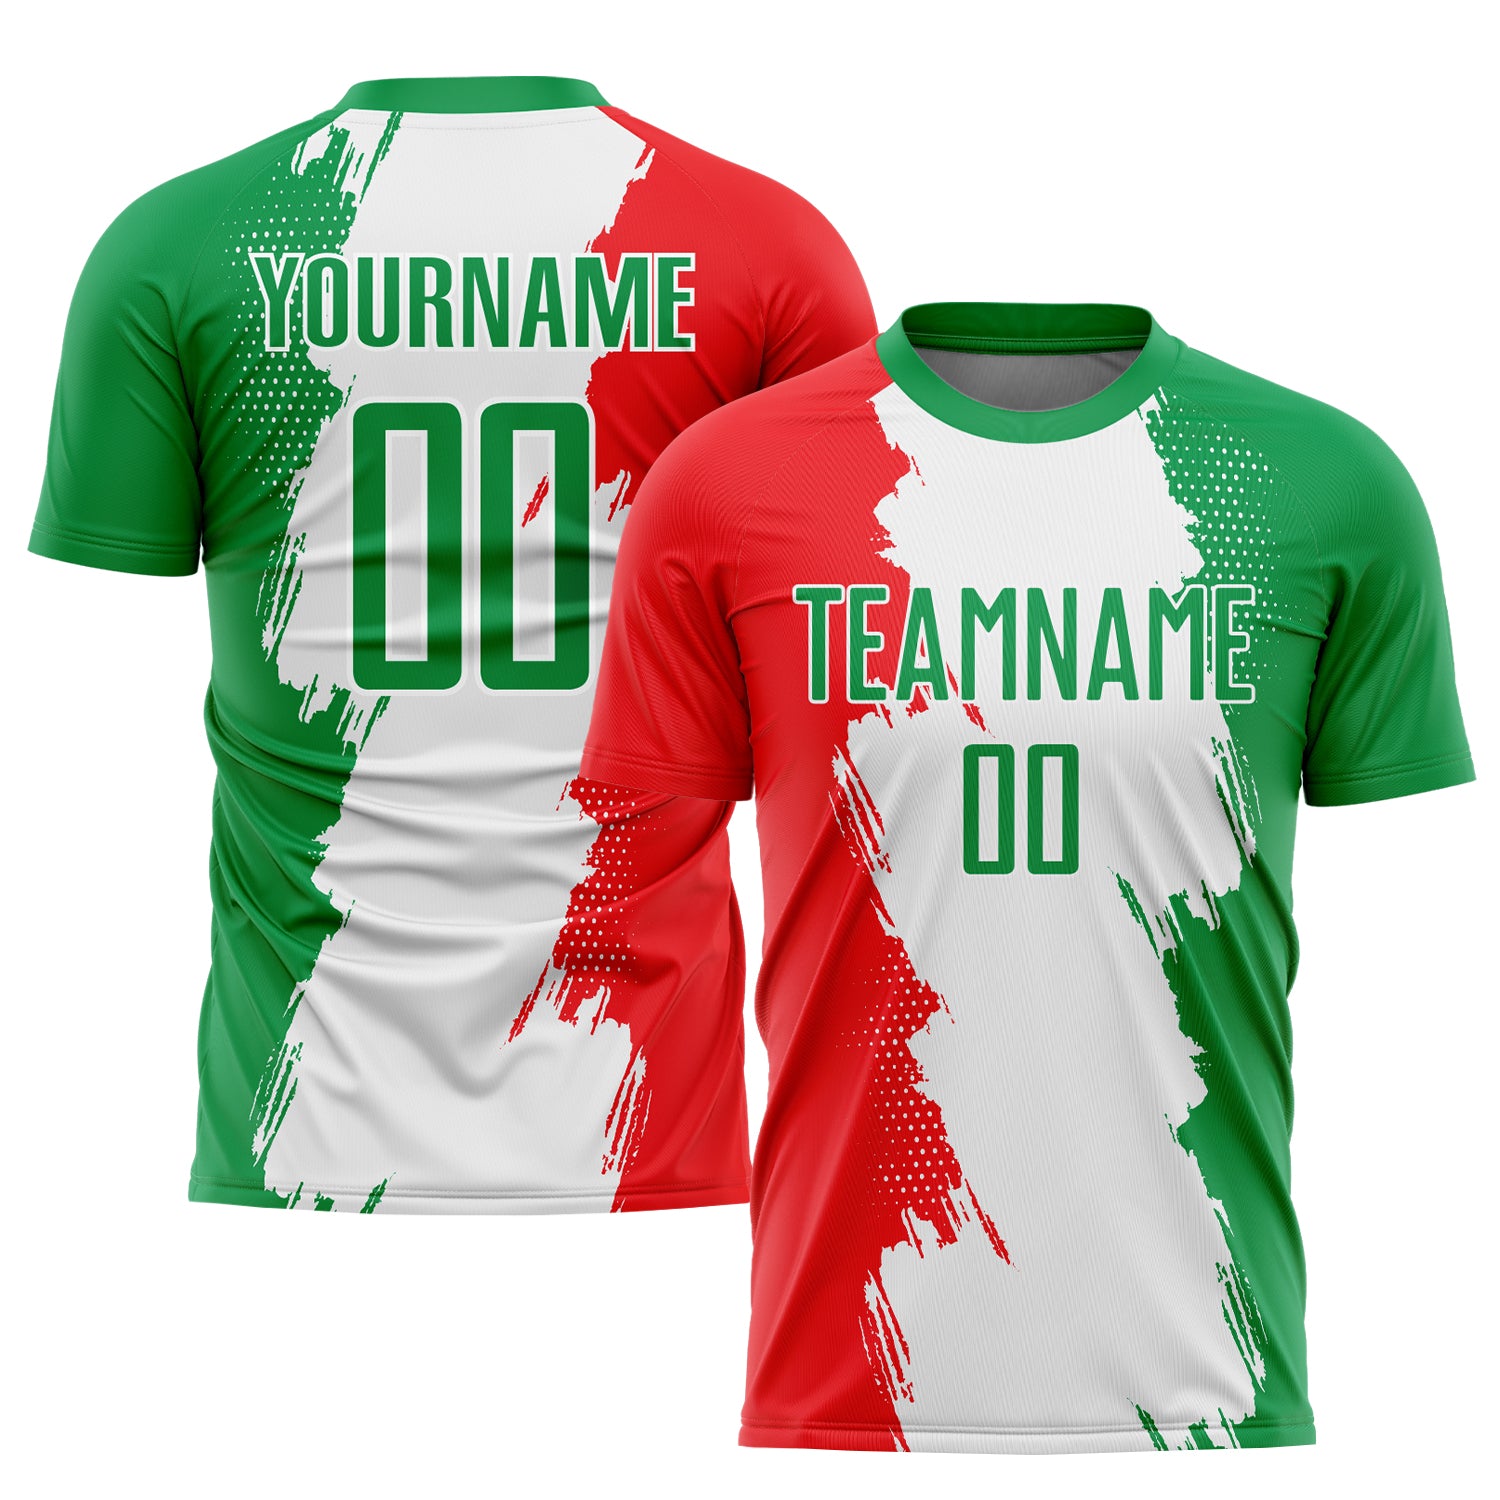 FANSIDEA Custom Soccer Jersey Uniform Grass Green Red-White Sublimation Mexico Youth Size:140